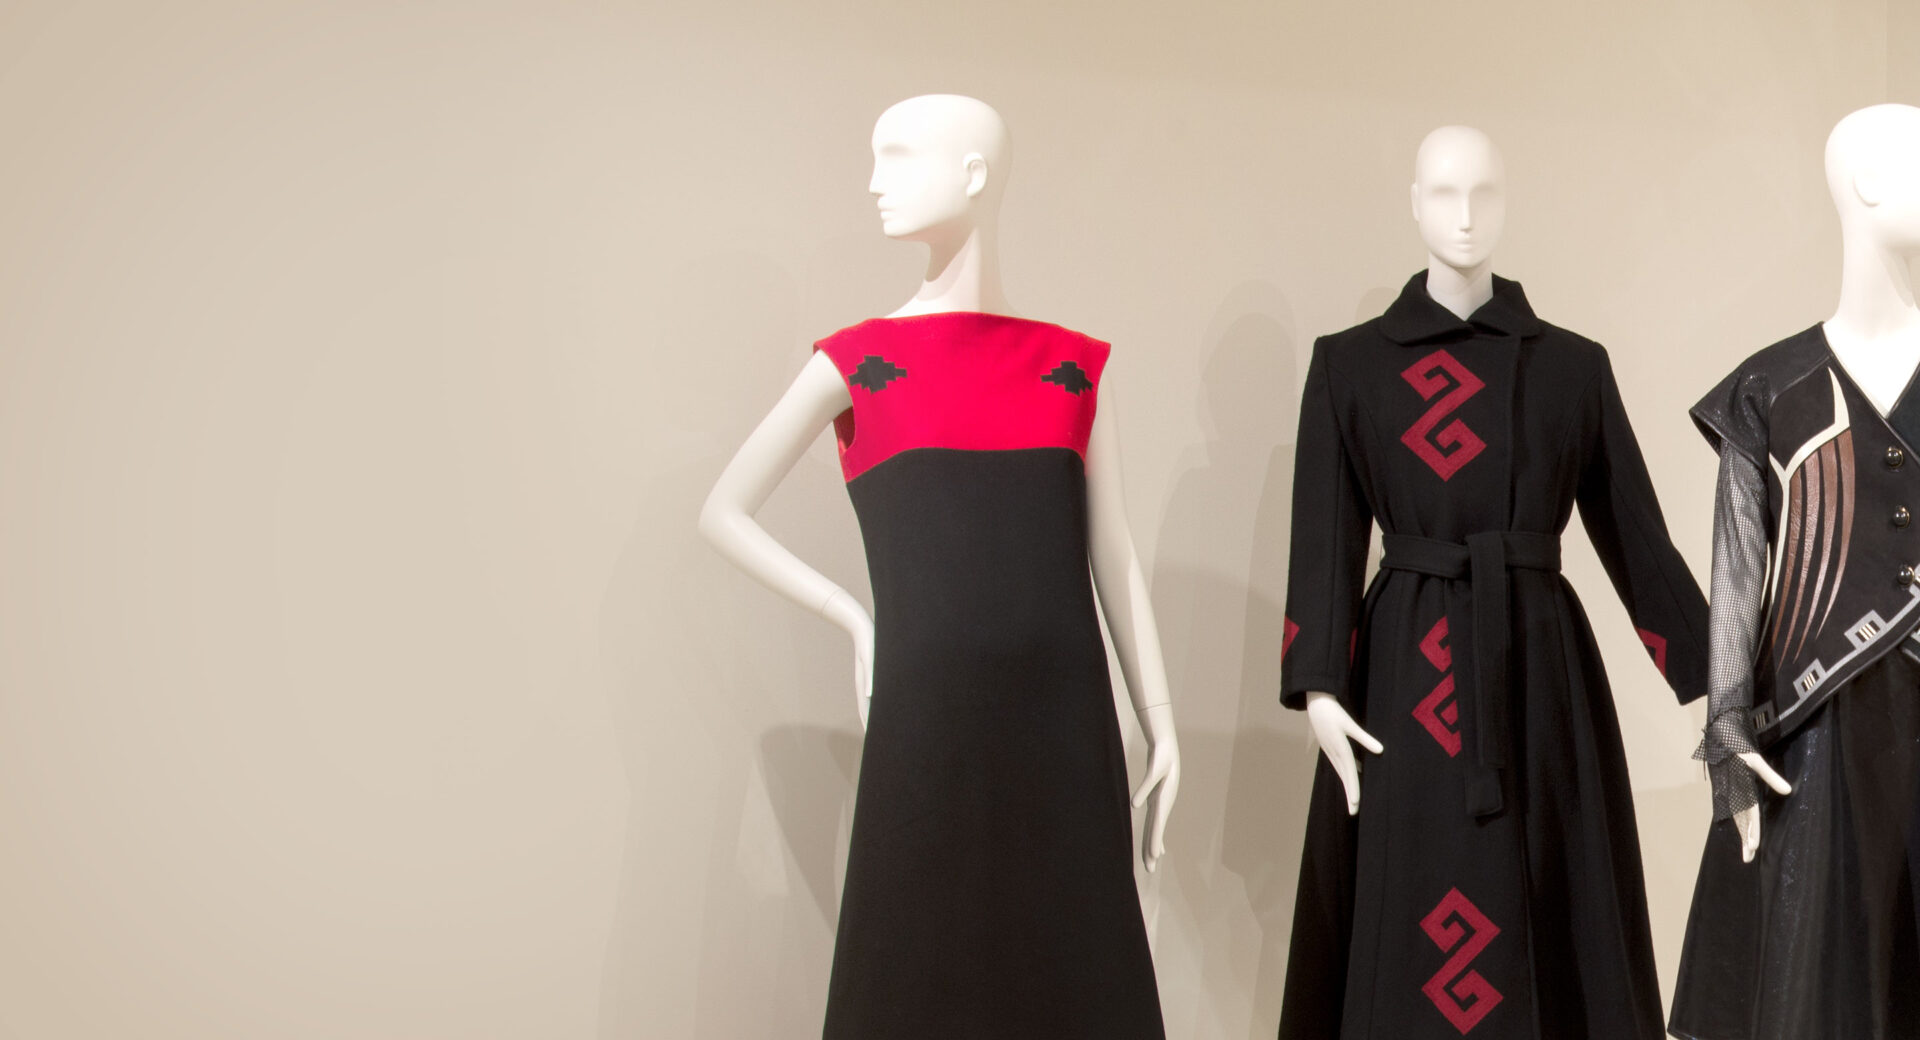 Three mannequins wearing black and red dresses.